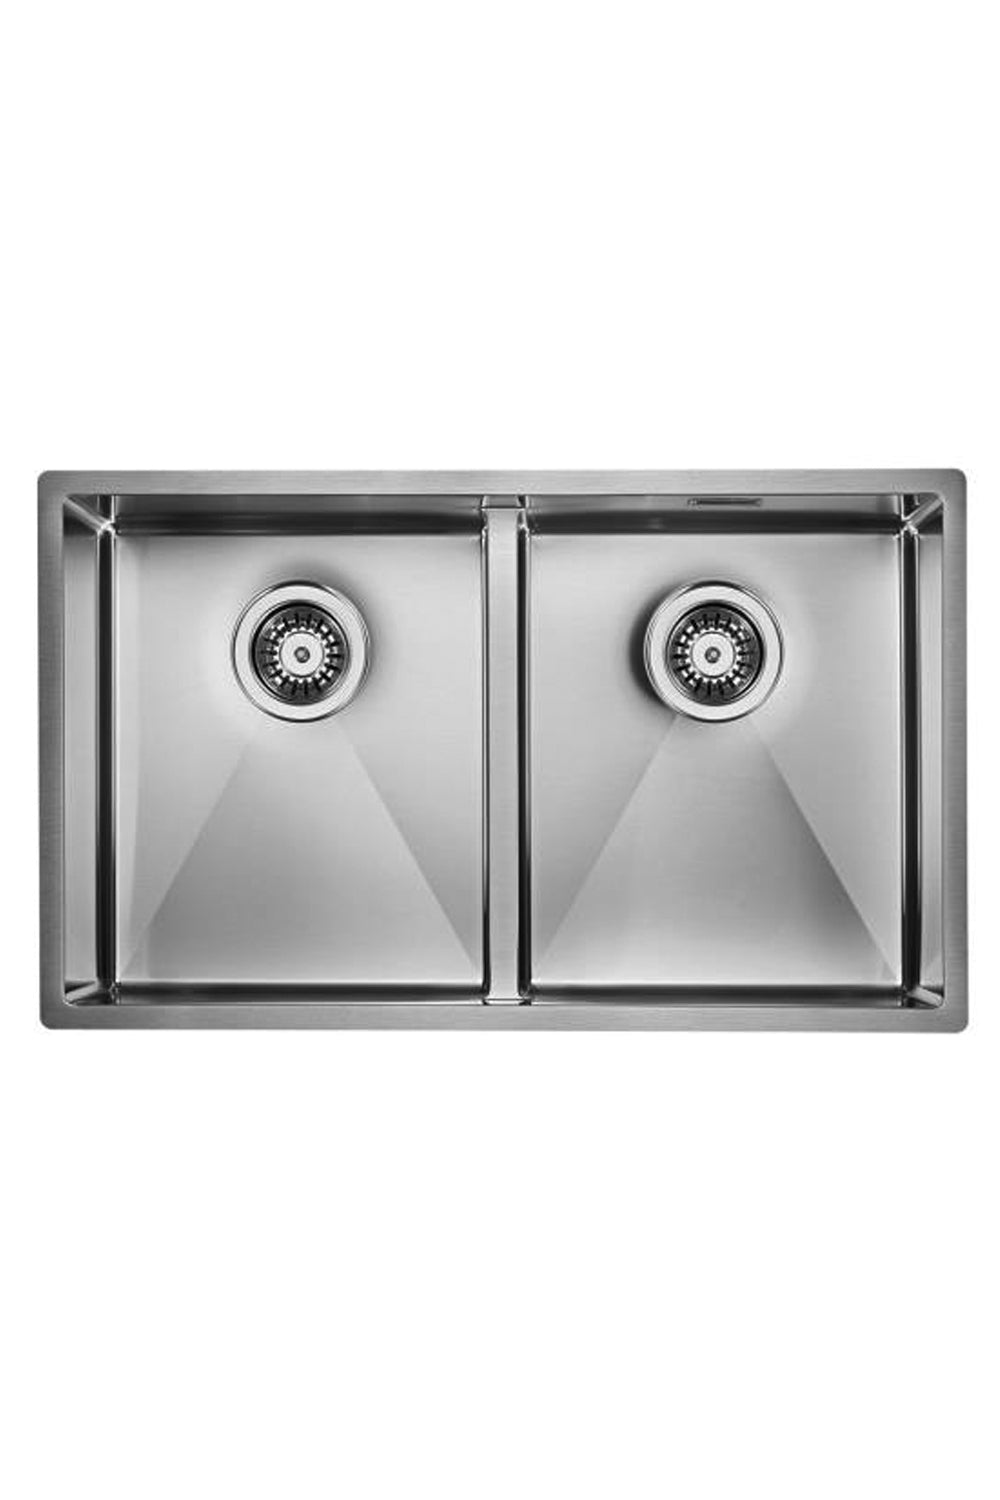 LUISINA 340+340mm R10-Corner Square Stainless Steel Double Sink 意大利製造小圓角不銹鋼雙星盆 | Made in Italy |